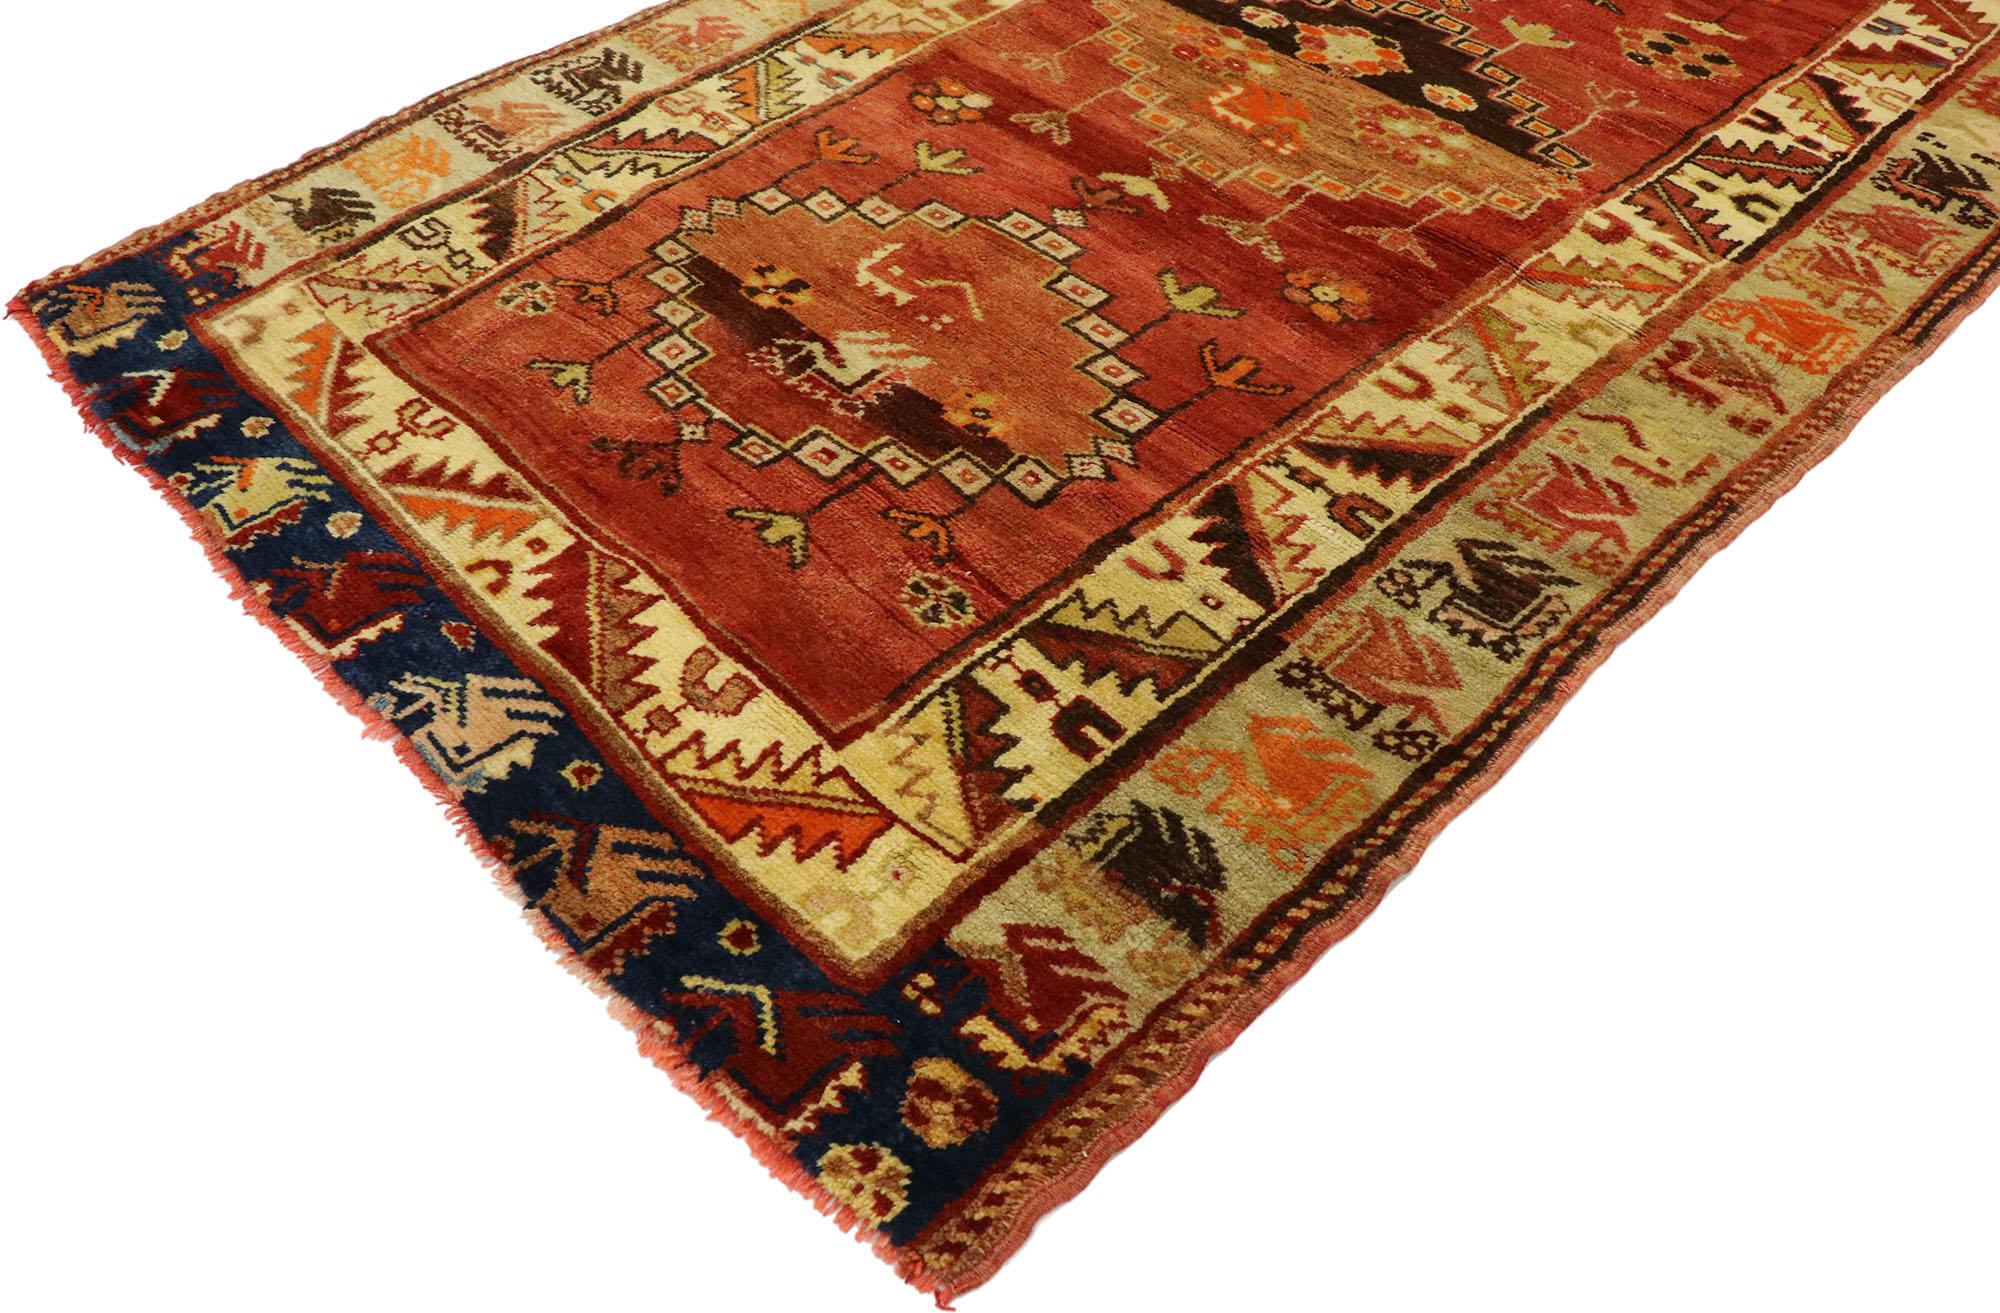 53096 Vintage Turkish Oushak Rug, ​03'07 x 06'04.
​Step into a world of tribal enchantment and nomadic charm with this hand knotted vintage Turkish Oushak rug. Every inch is a woven masterpiece, with a striking tribal design and energetic earthy